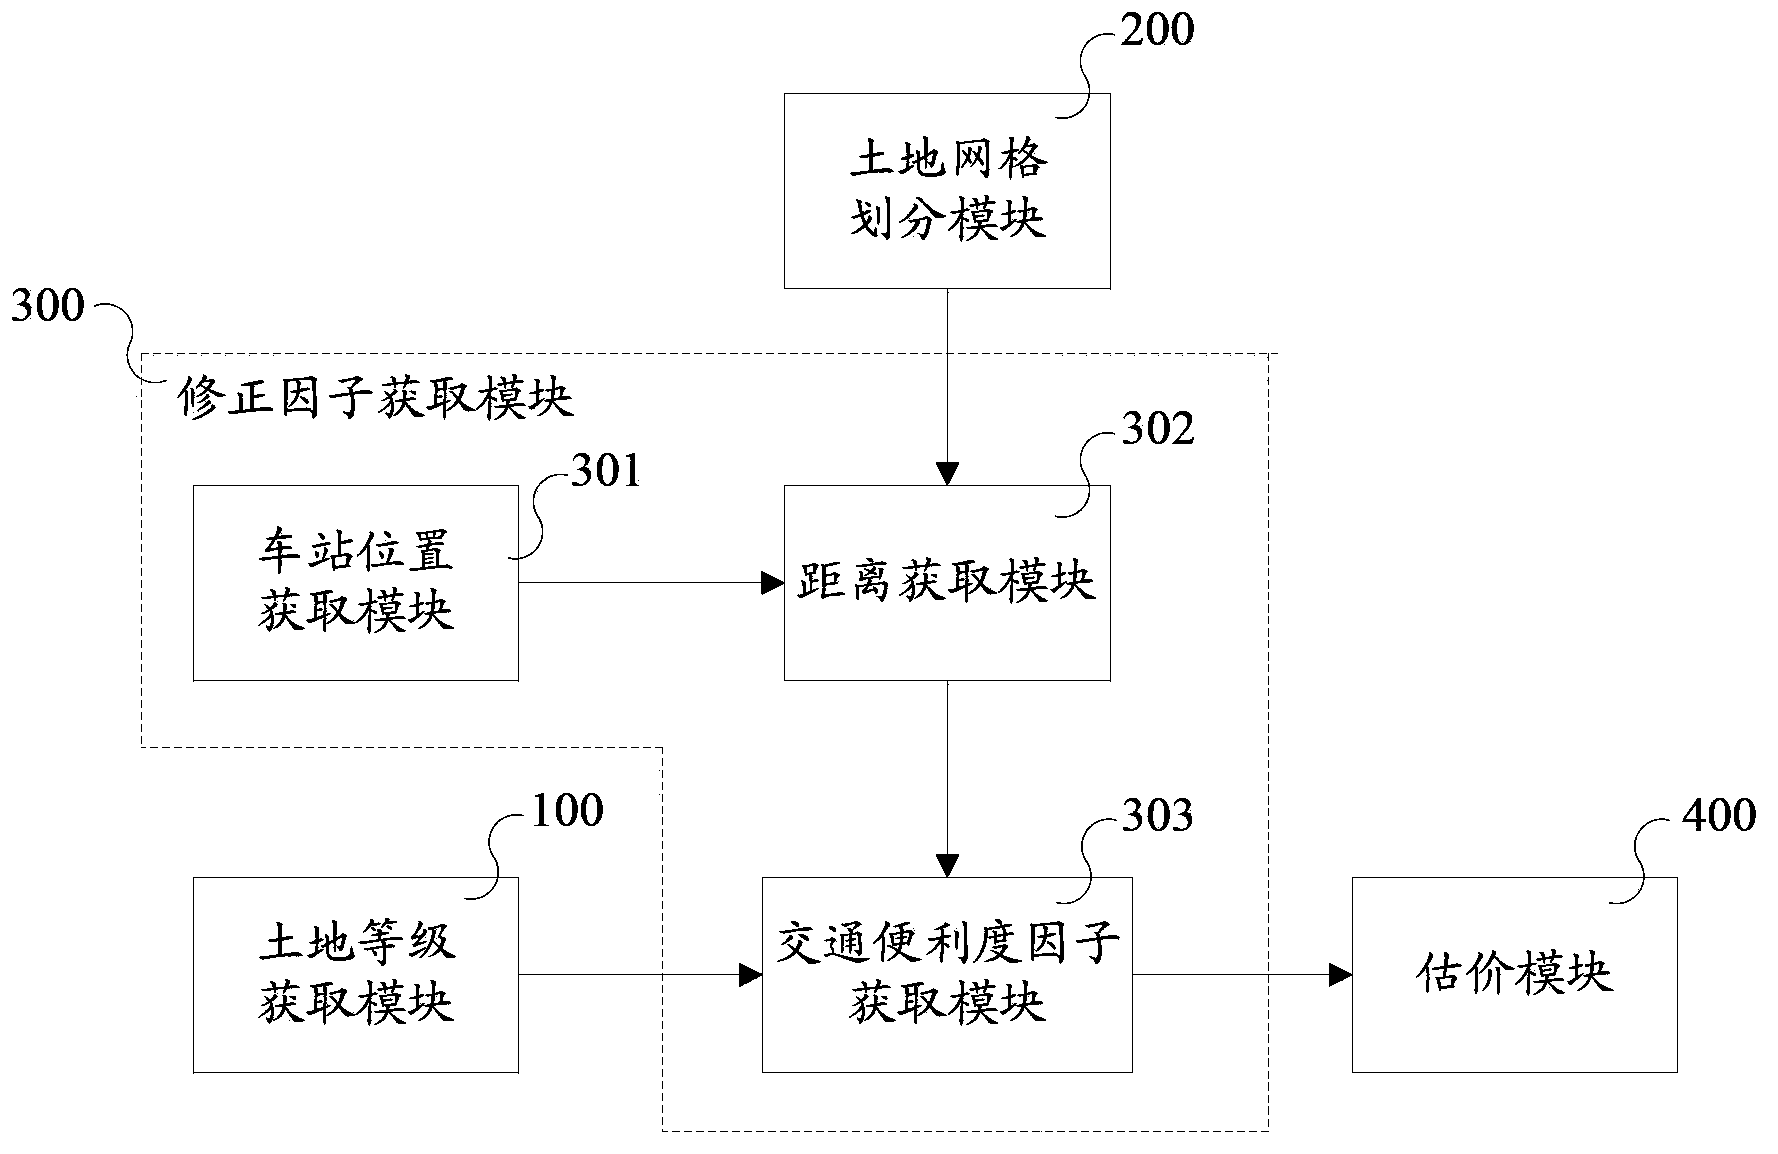 Land batch valuation device and method based on integrated factors